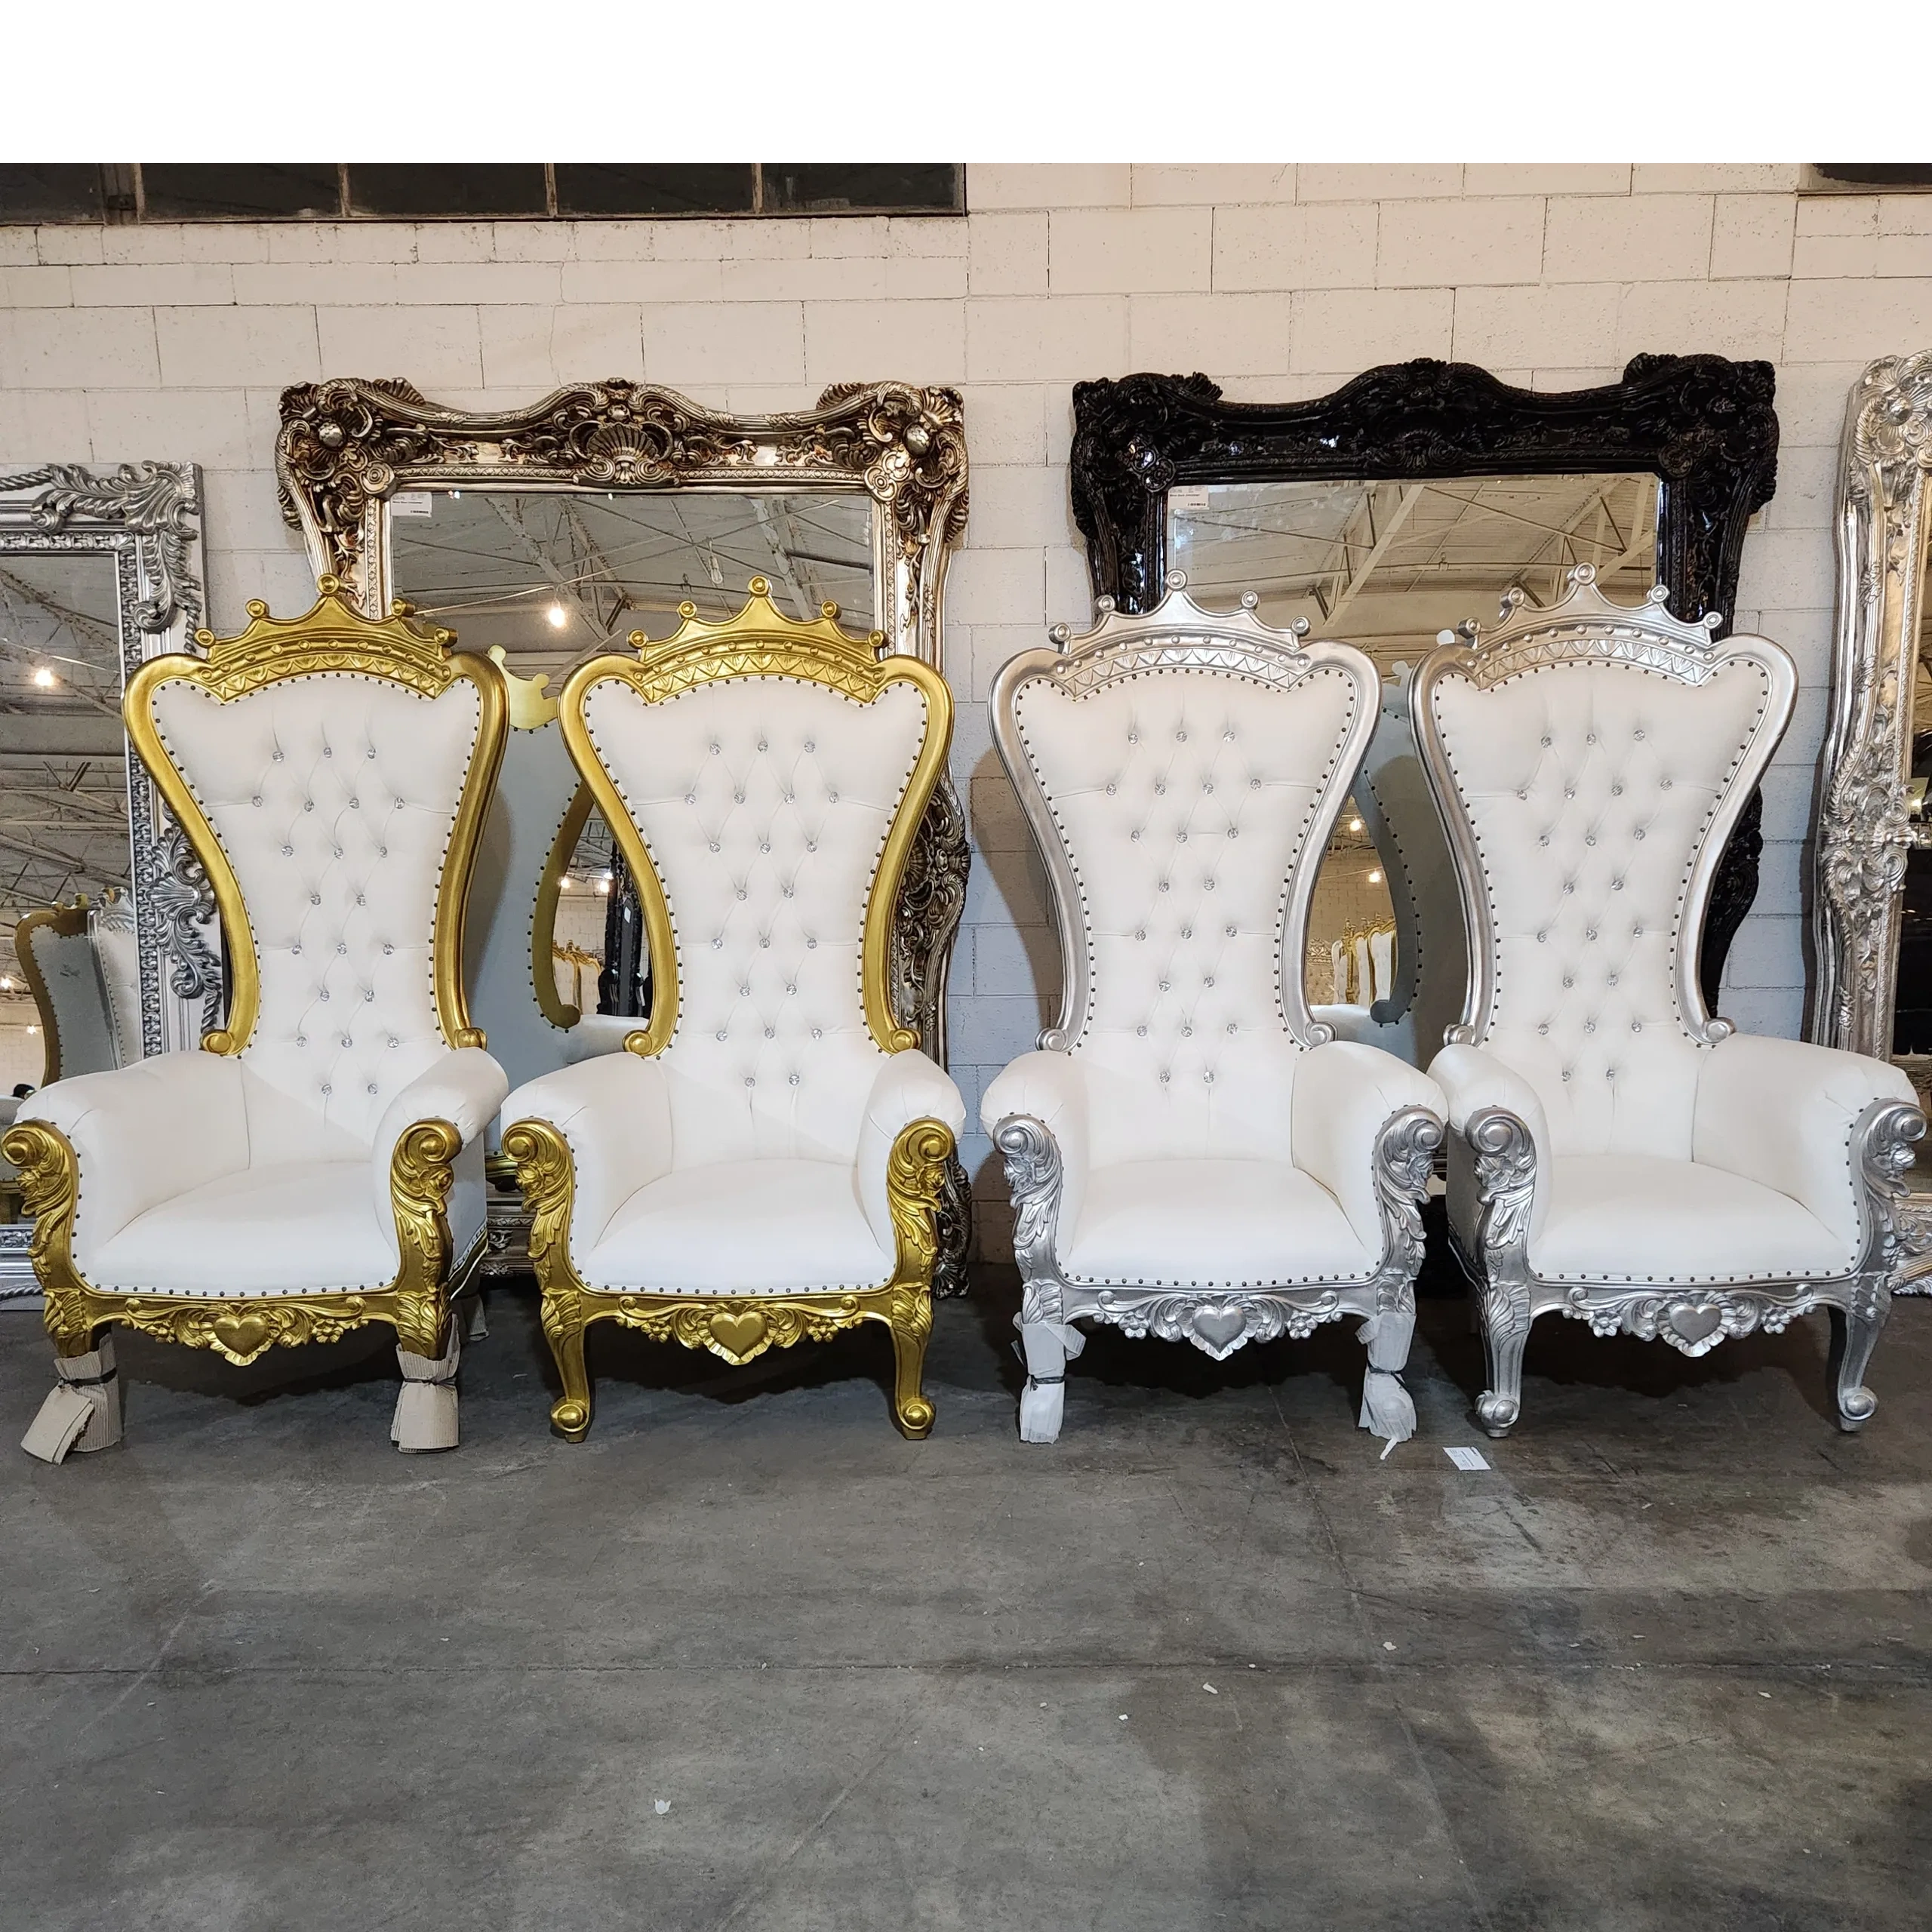 THRONE CHAIR  

Furniture To Go 
2759 Irving Blvd Dallas 75207 
214 853 0989

 